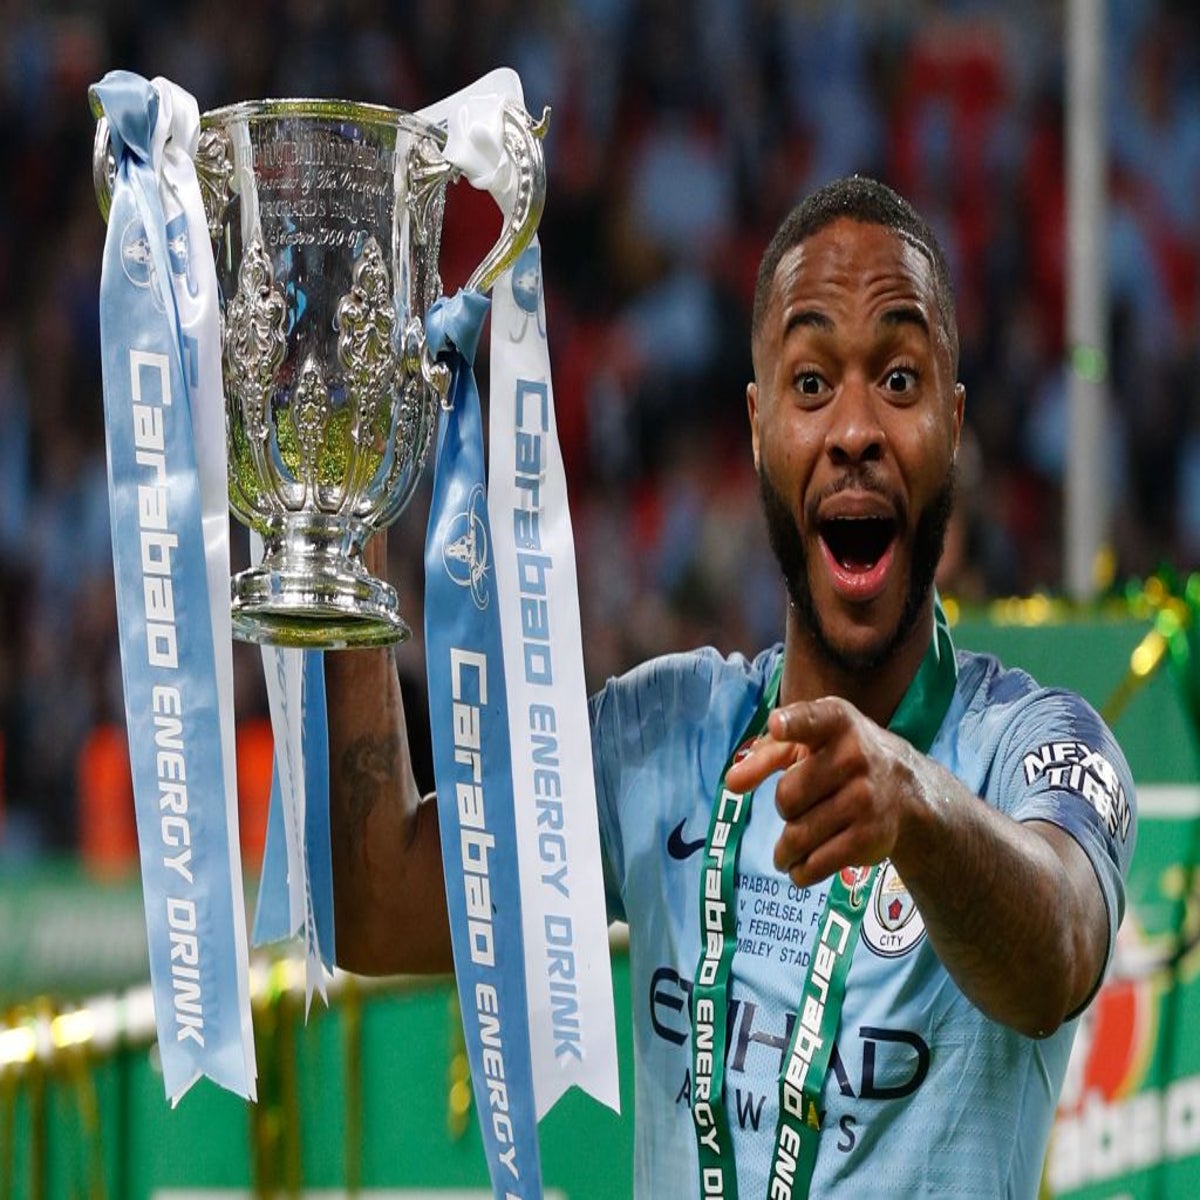 When is the Carabao Cup final 2021? Date, kick-off time and how to watch  Man City vs Tottenham live on TV